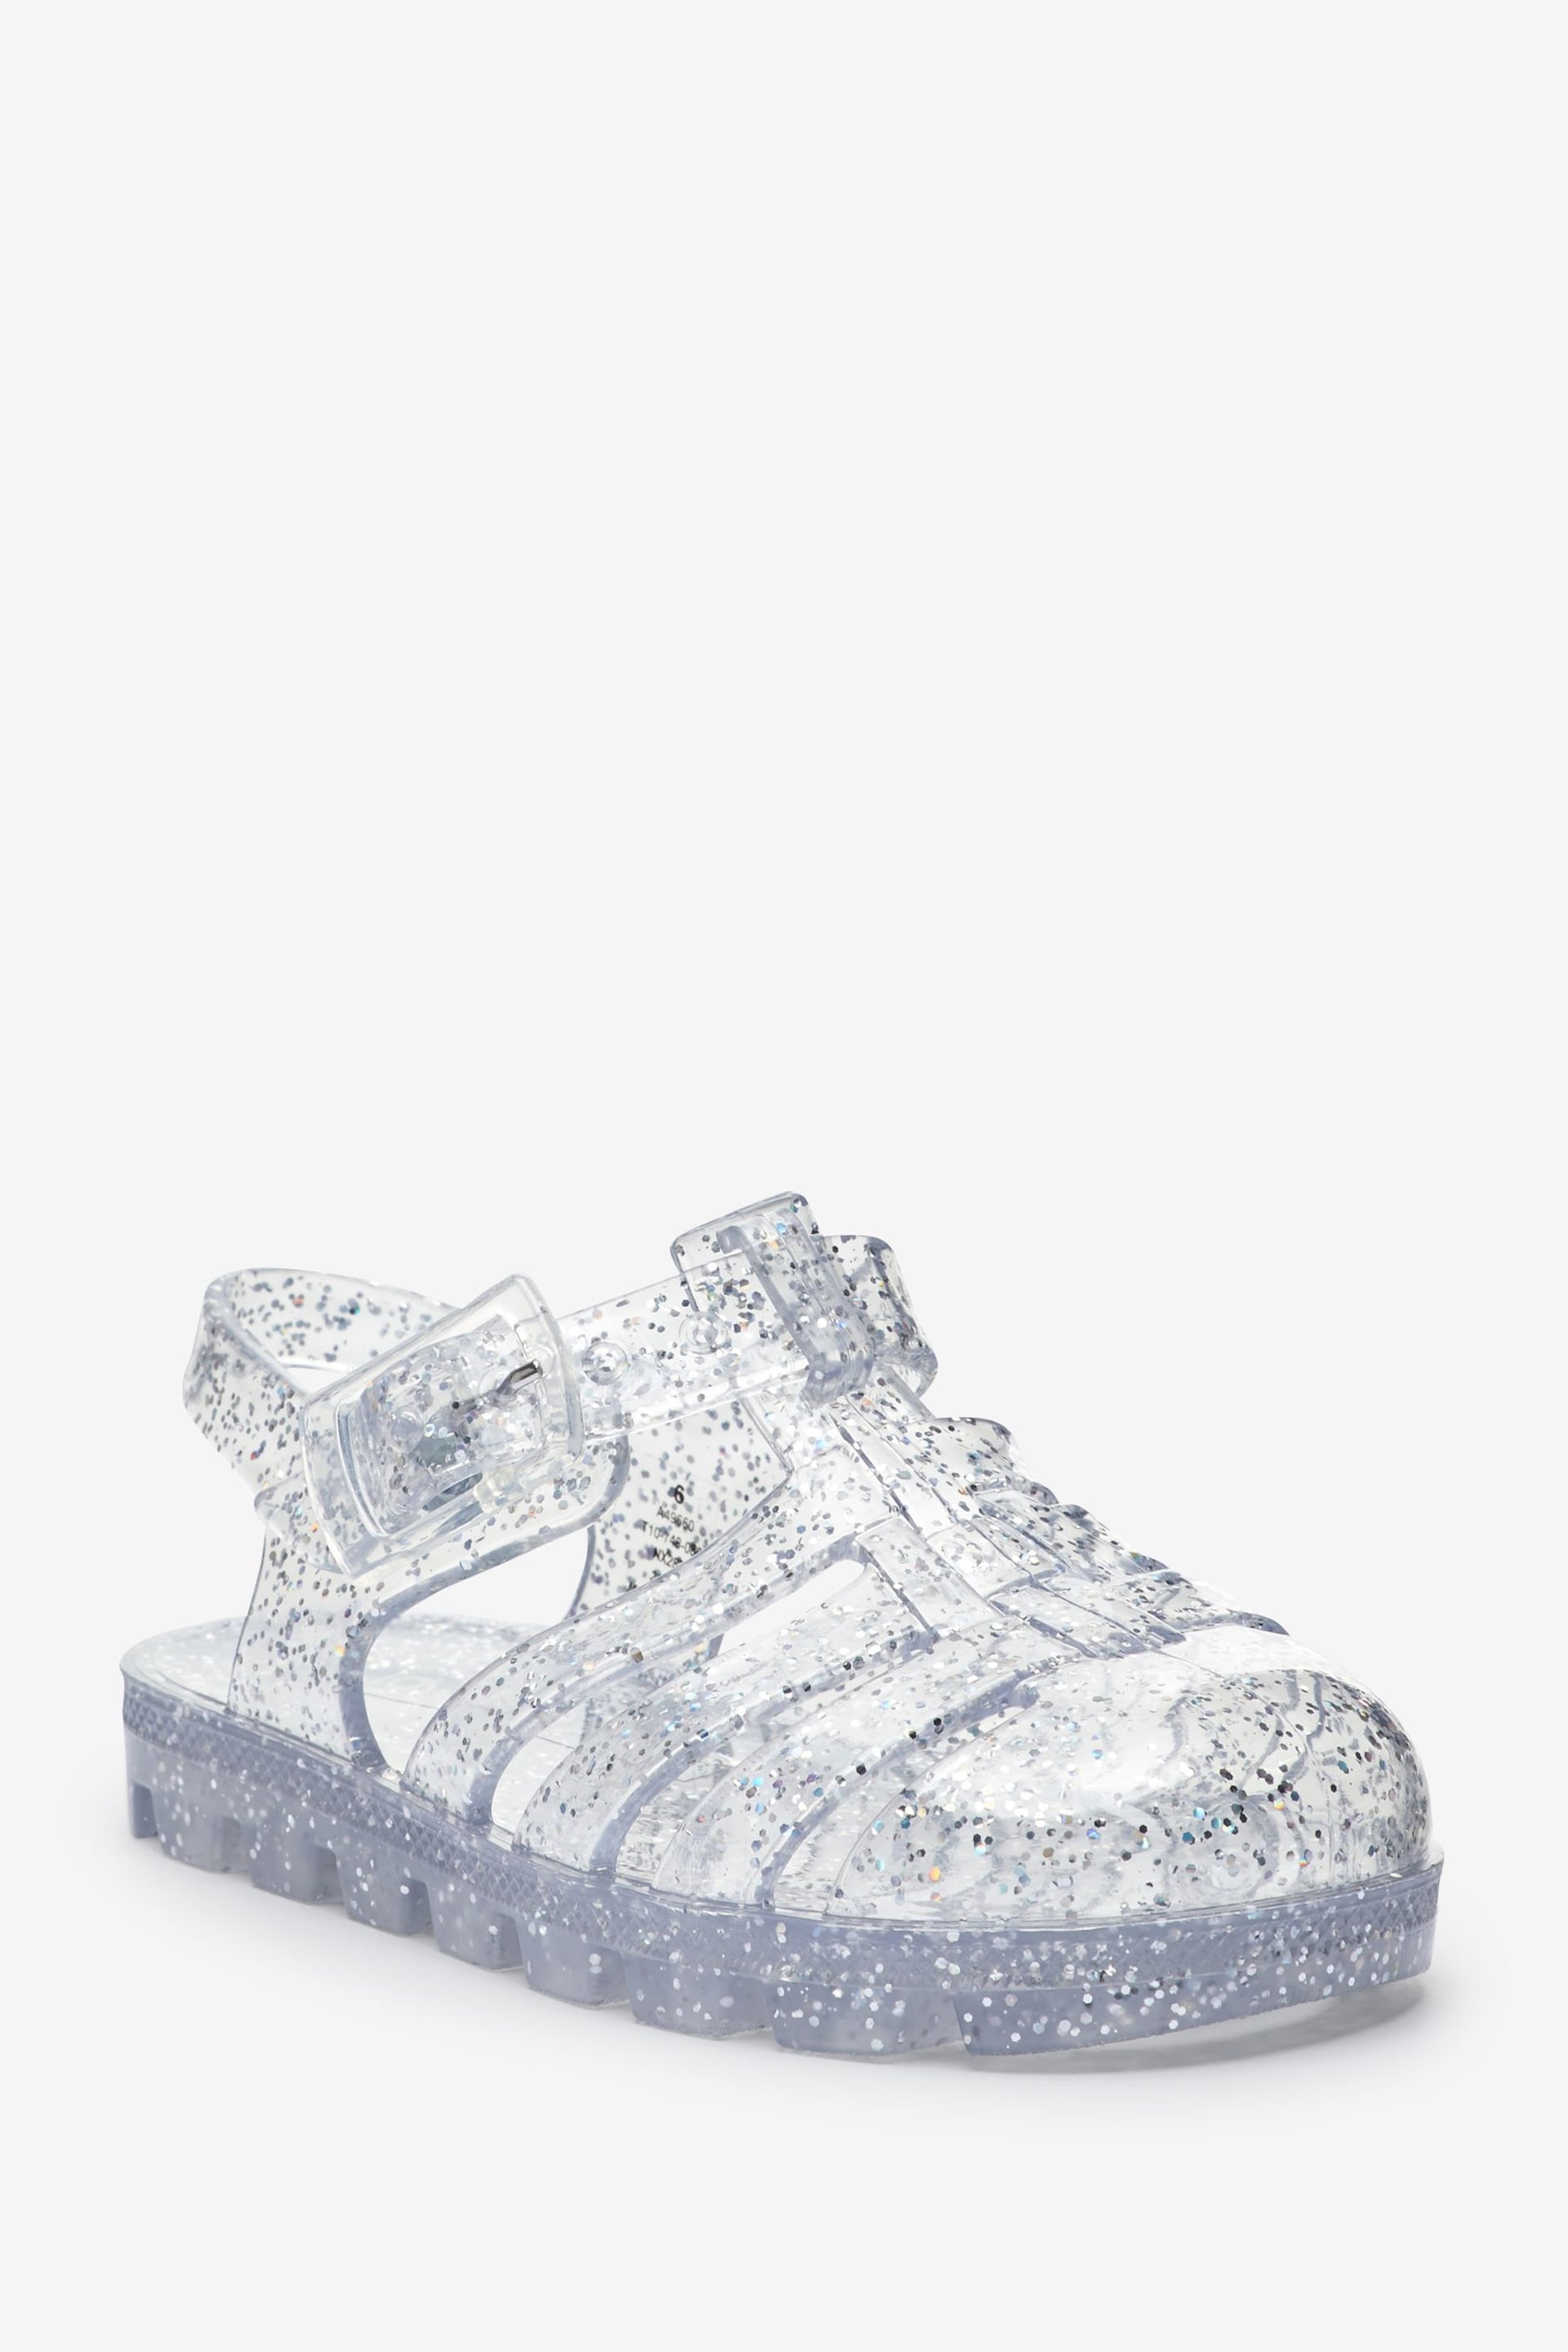 Silver Glitter Jelly Sandals - Image 2 of 4